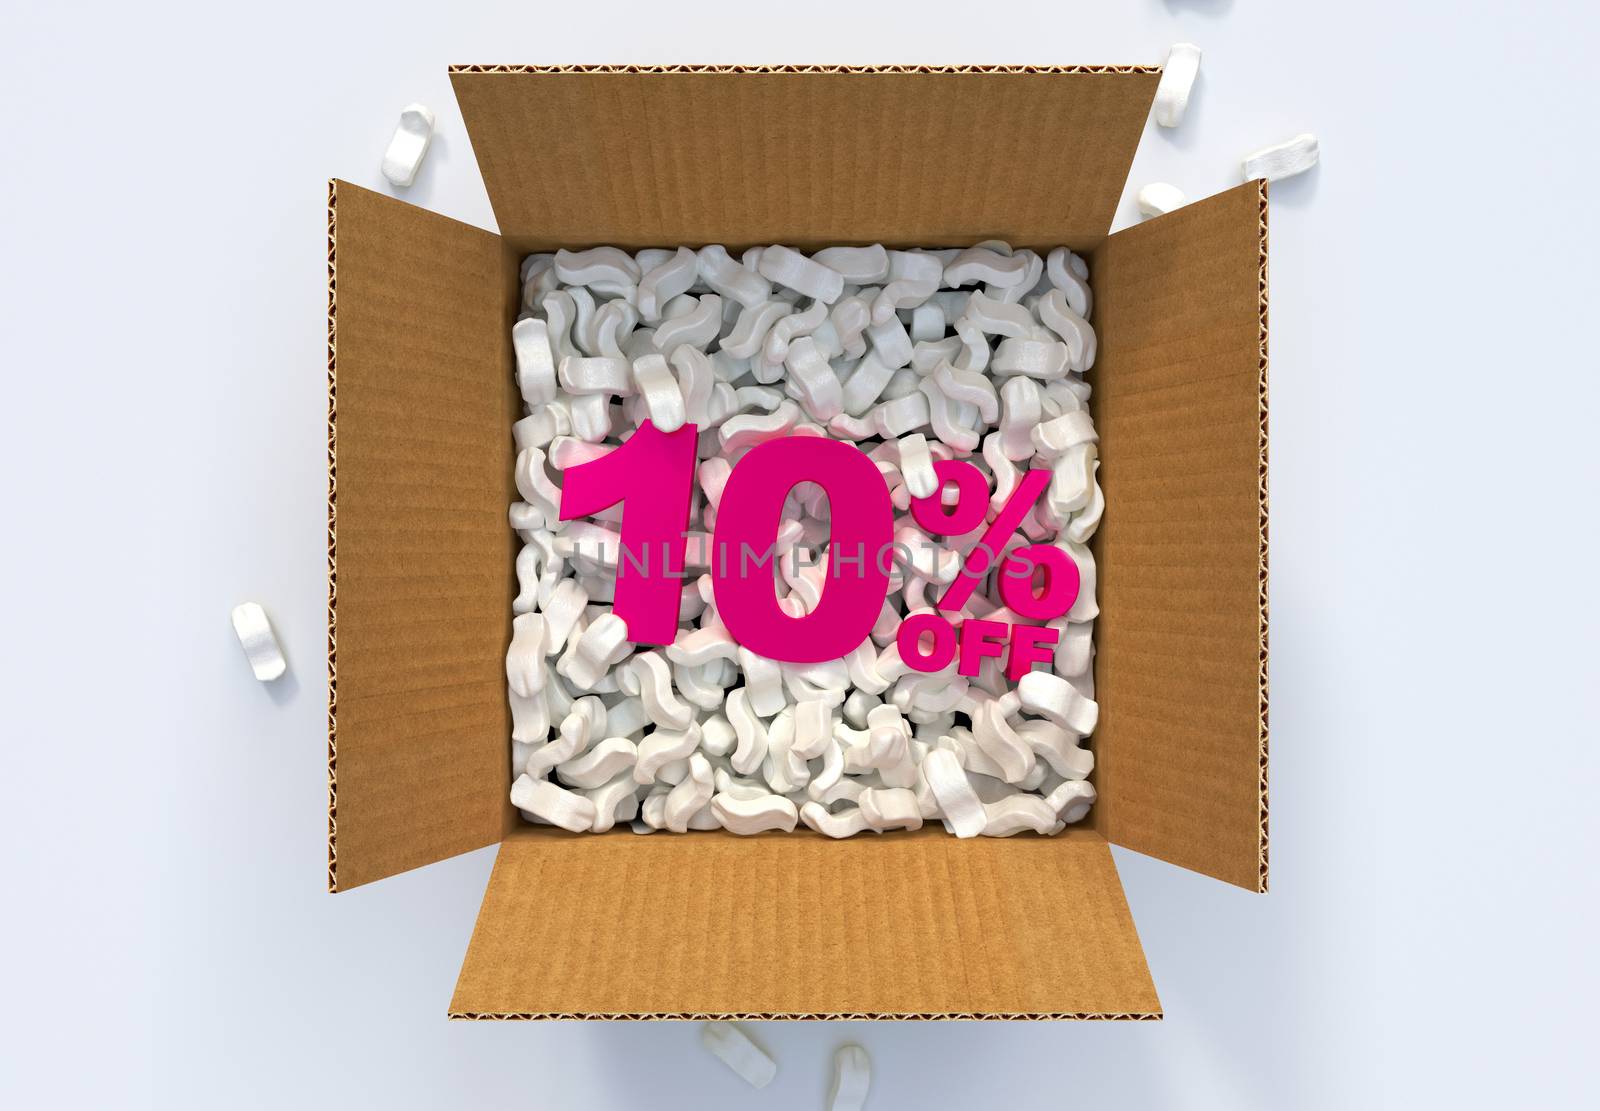 Cardboard Box with shipping peanuts and 10 percent off sign